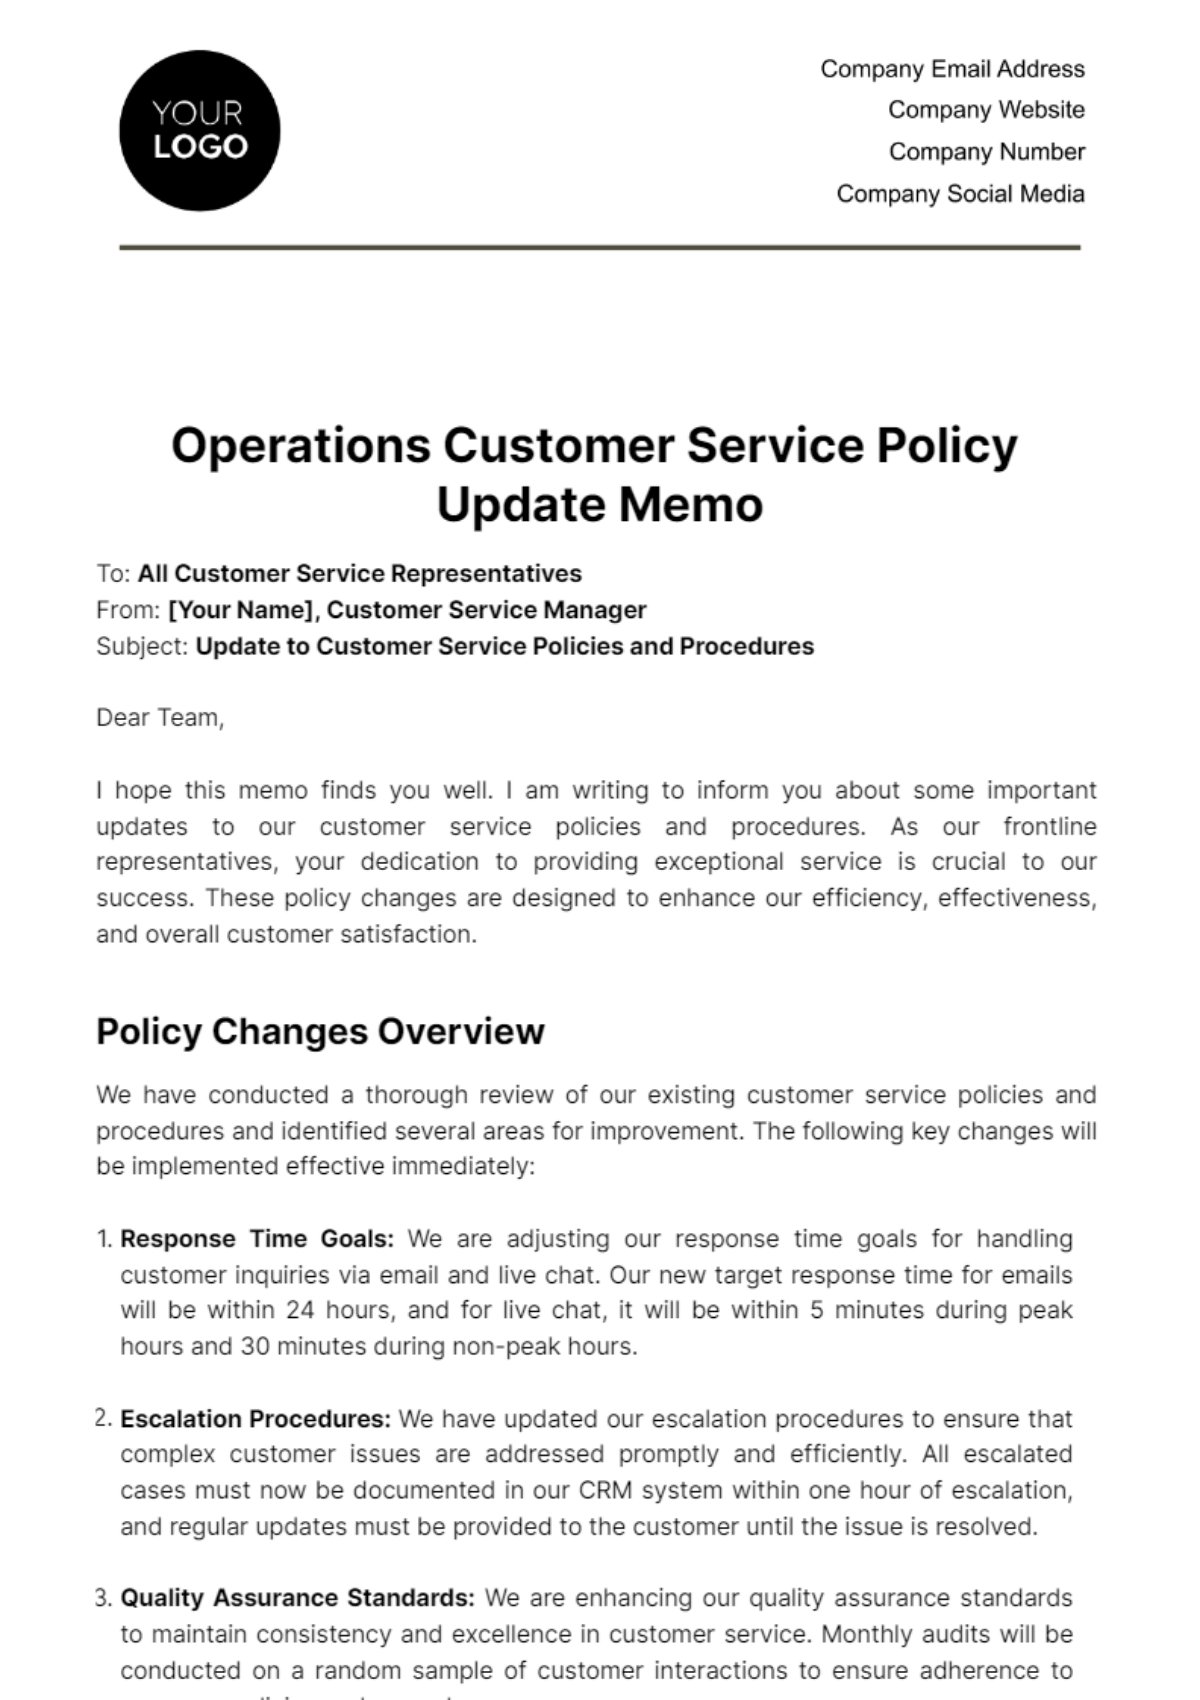 Operations Customer Service Policy Update Memo Template